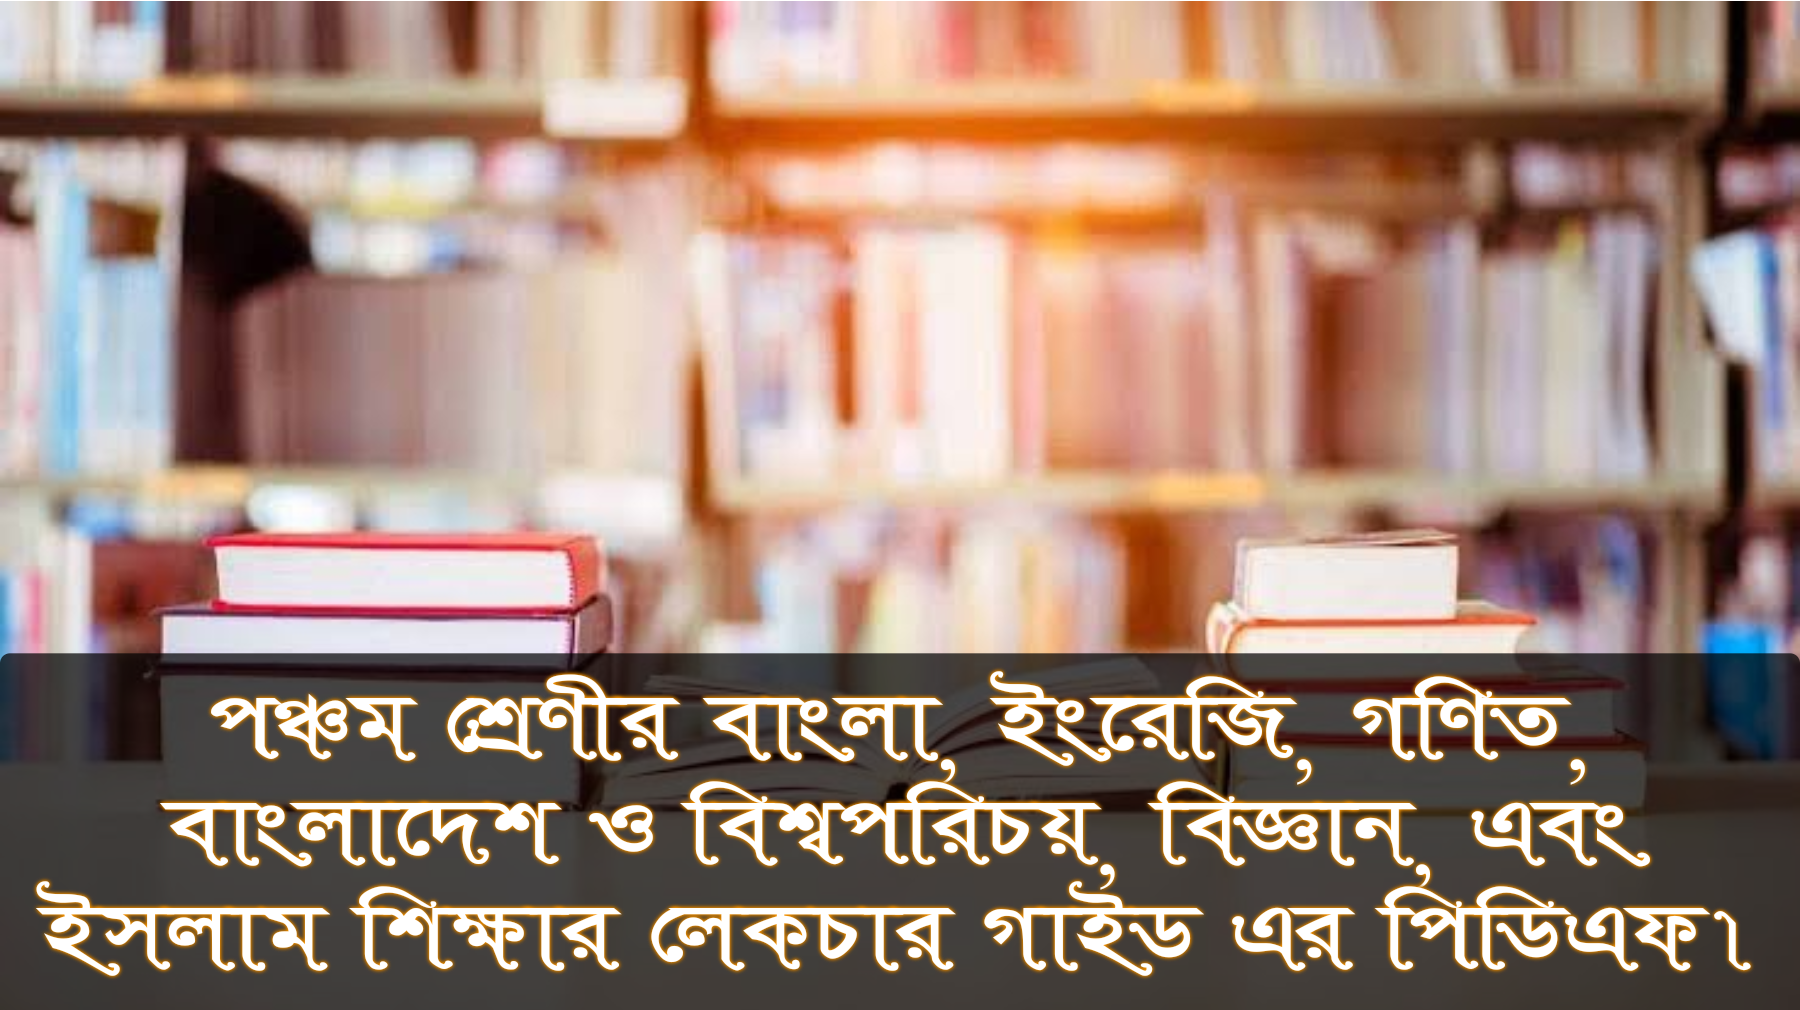 Lecture guide for Class 5, Class 5 Lecture guide 2022, Class 5 the Lecture guide pdf, Lecture guide for Class 5 pdf download, Lecture guide for Class 5,  Lecture bangla guide for Class 5 pdf, Lecture bangla guide for Class 5 pdf download, Lecture guide for class 5 Bangla, Lecture bangla guide for class 5, Lecture bangla guide for Class 5 pdf download link, Lecture english guide for Class 5 pdf download, Lecture english guide for class 5, Lecture english guide for Class 5 pdf download link, Lecture math guide for Class 5 pdf download, Lecture math guide for class 5, Lecture math guide for Class 5 pdf download link, Lecture bangladesh and global studies guide for Class 5 pdf download, Lecture bangladesh and global studies guide for class 5, Lecture bangladesh and global studies guide for Class 5 pdf download link, Lecture science guide for Class 5 pdf download, Lecture science guide for class 5, Lecture science guide for Class 5 pdf download link, Lecture islam shikkha guide for Class 5 pdf download, Lecture islam shikkha guide for class 5, Lecture islam shikkha guide for Class 5 pdf download link